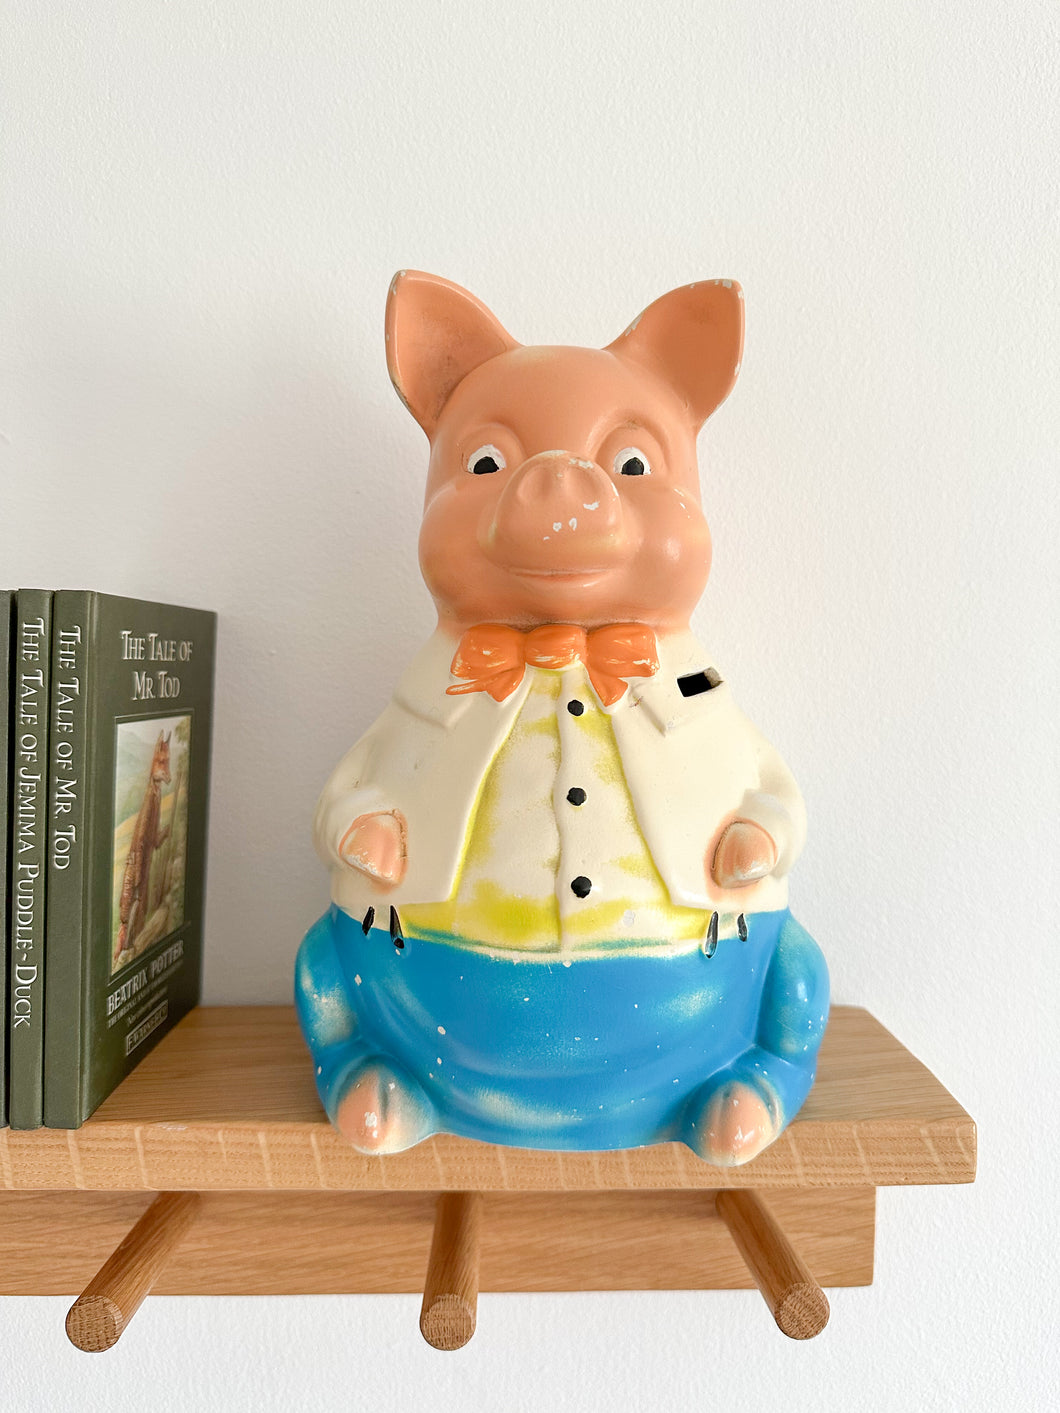 Vintage 1920s ceramic collectable ‘Mr Pig’ piggy bank or money box, by Ellgreave, rare with money slot on shoulder - Moppet